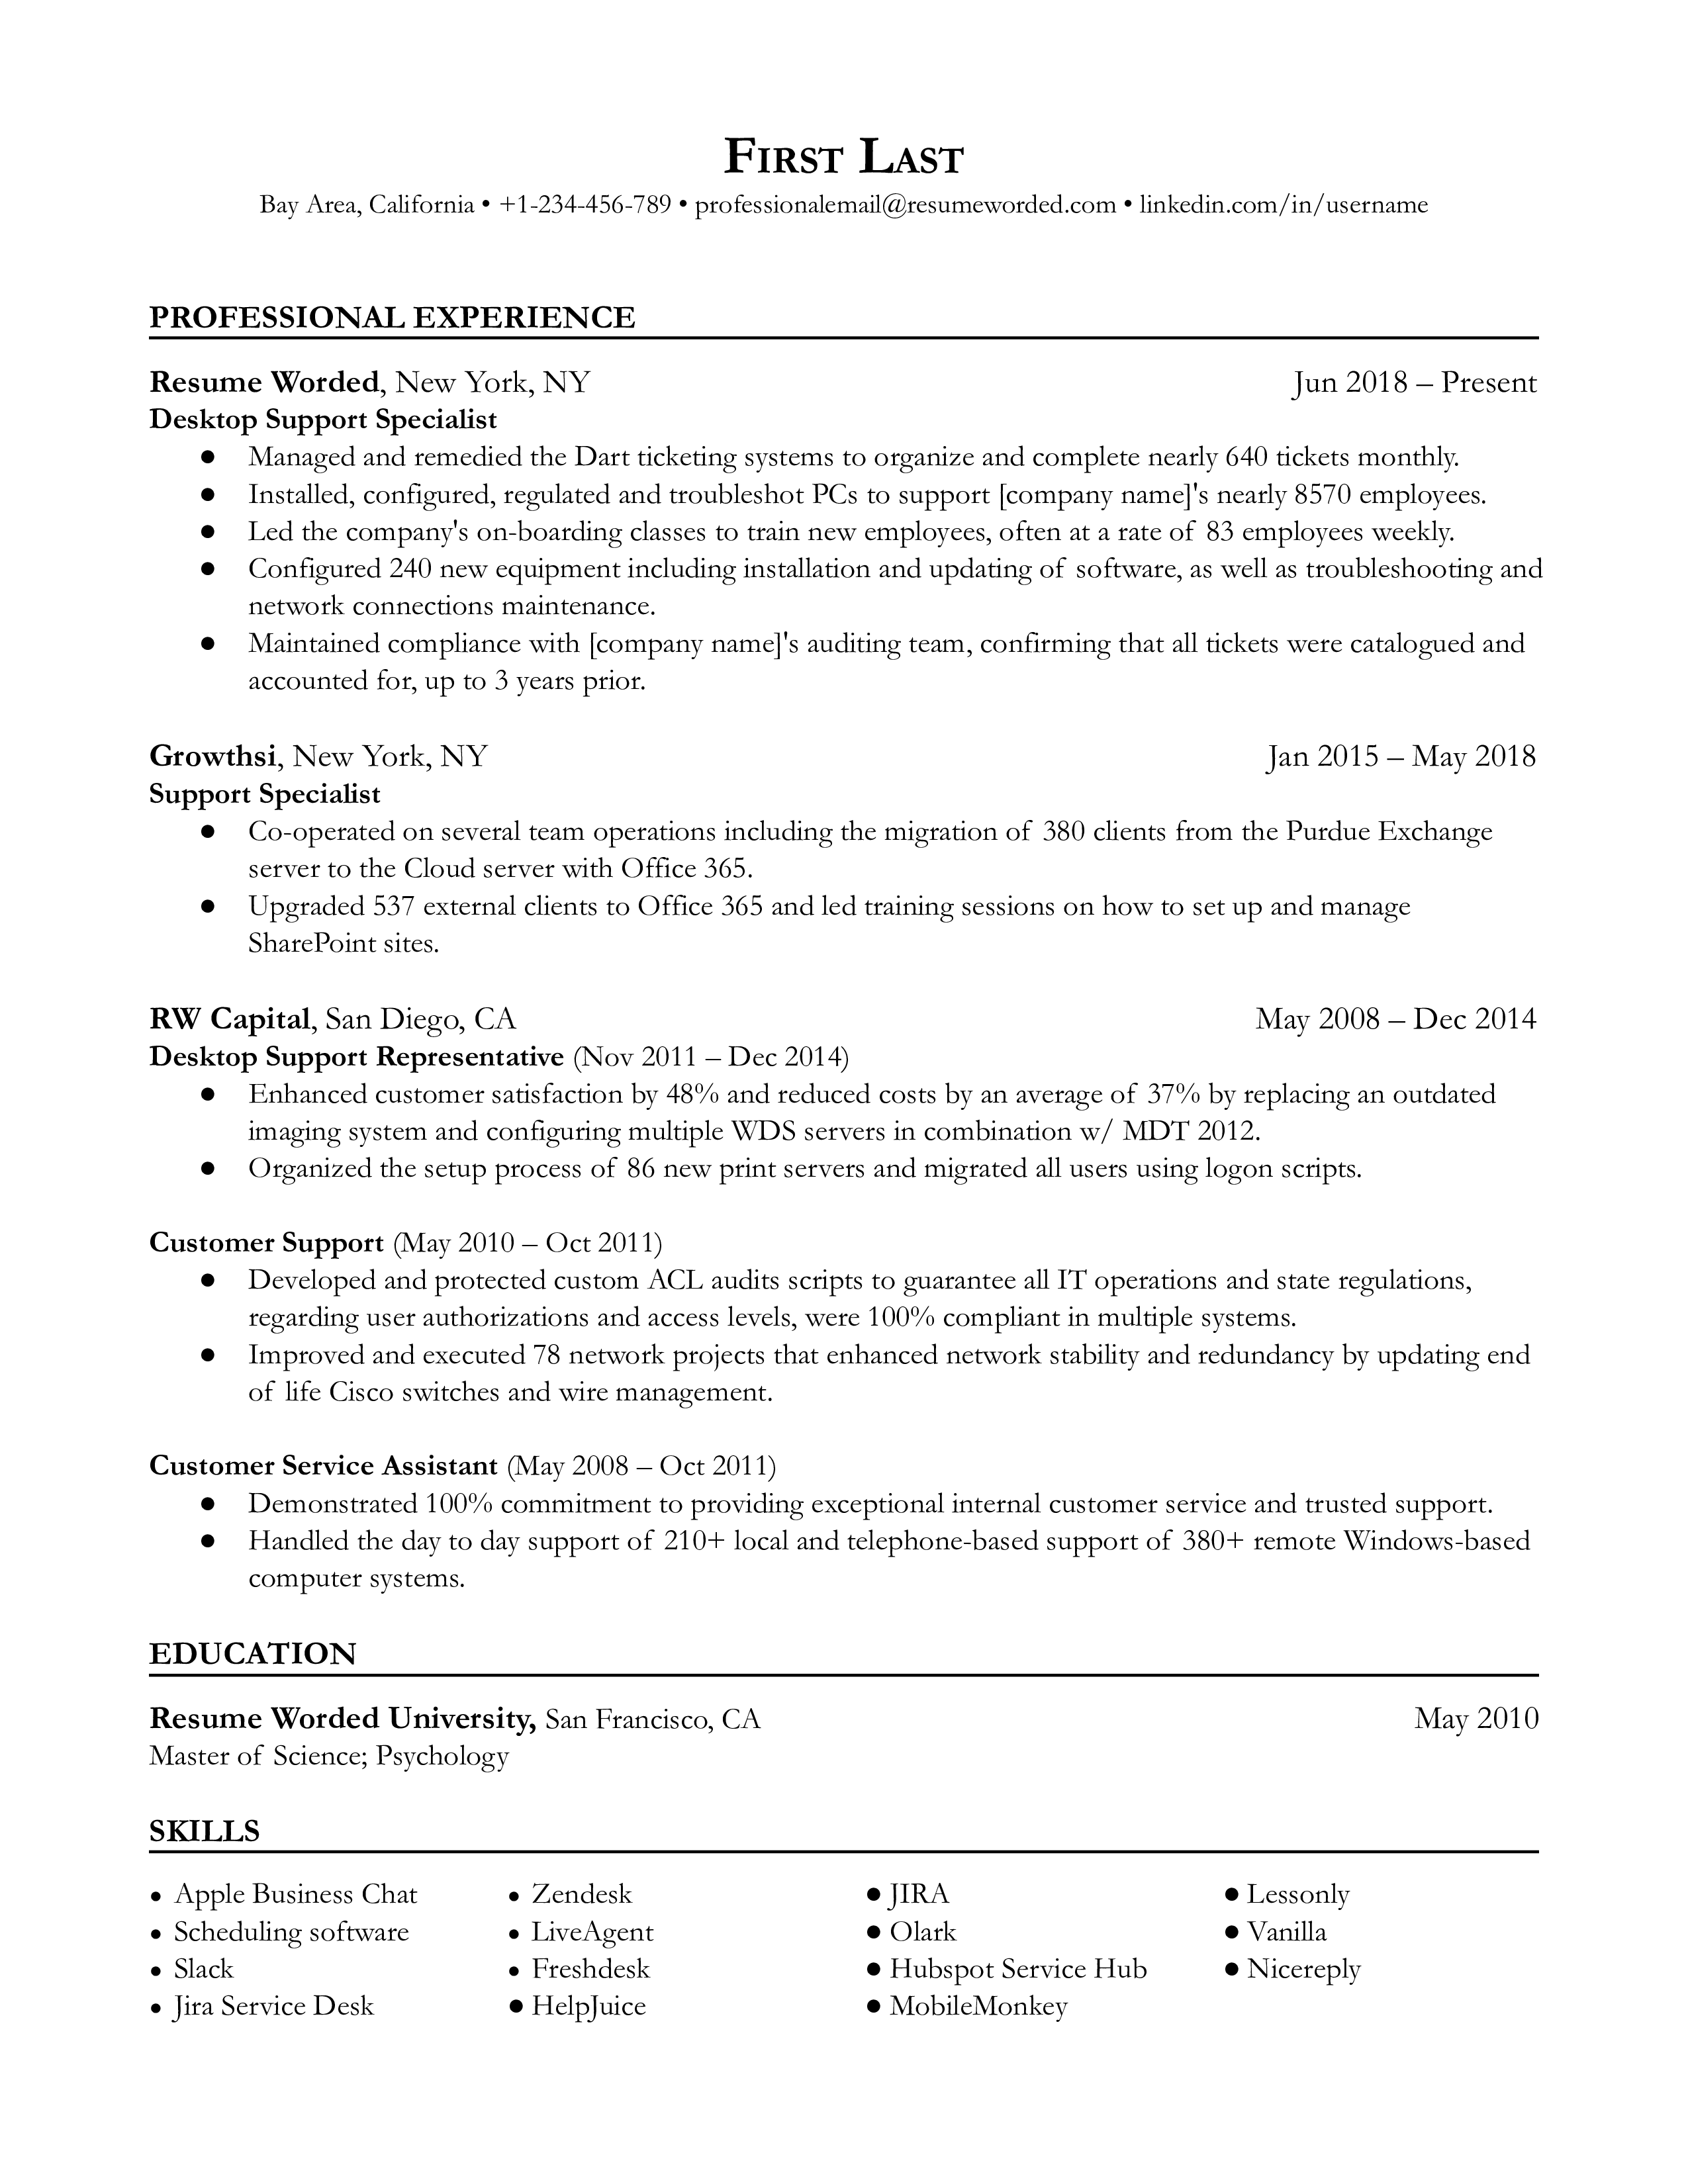 A Desktop Support Specialist resume highlighting professional experience in and skill set.